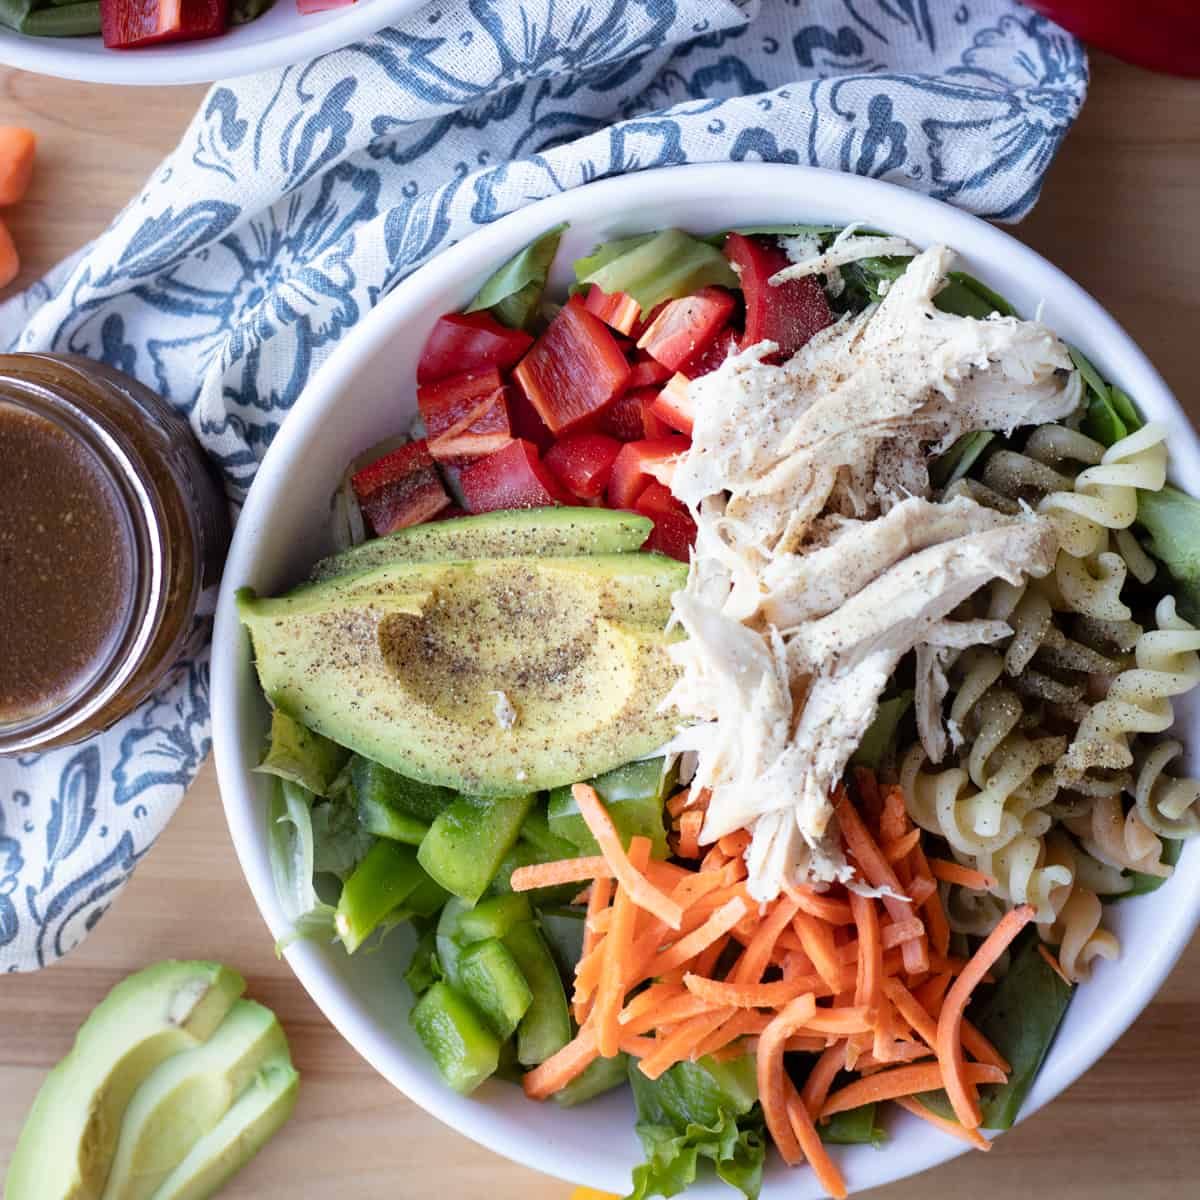 A bowl of rotisserie chicken garden salad with chicken, avocado, bell pepper, carrots, fusilli pasta, and salad dressing on the side.